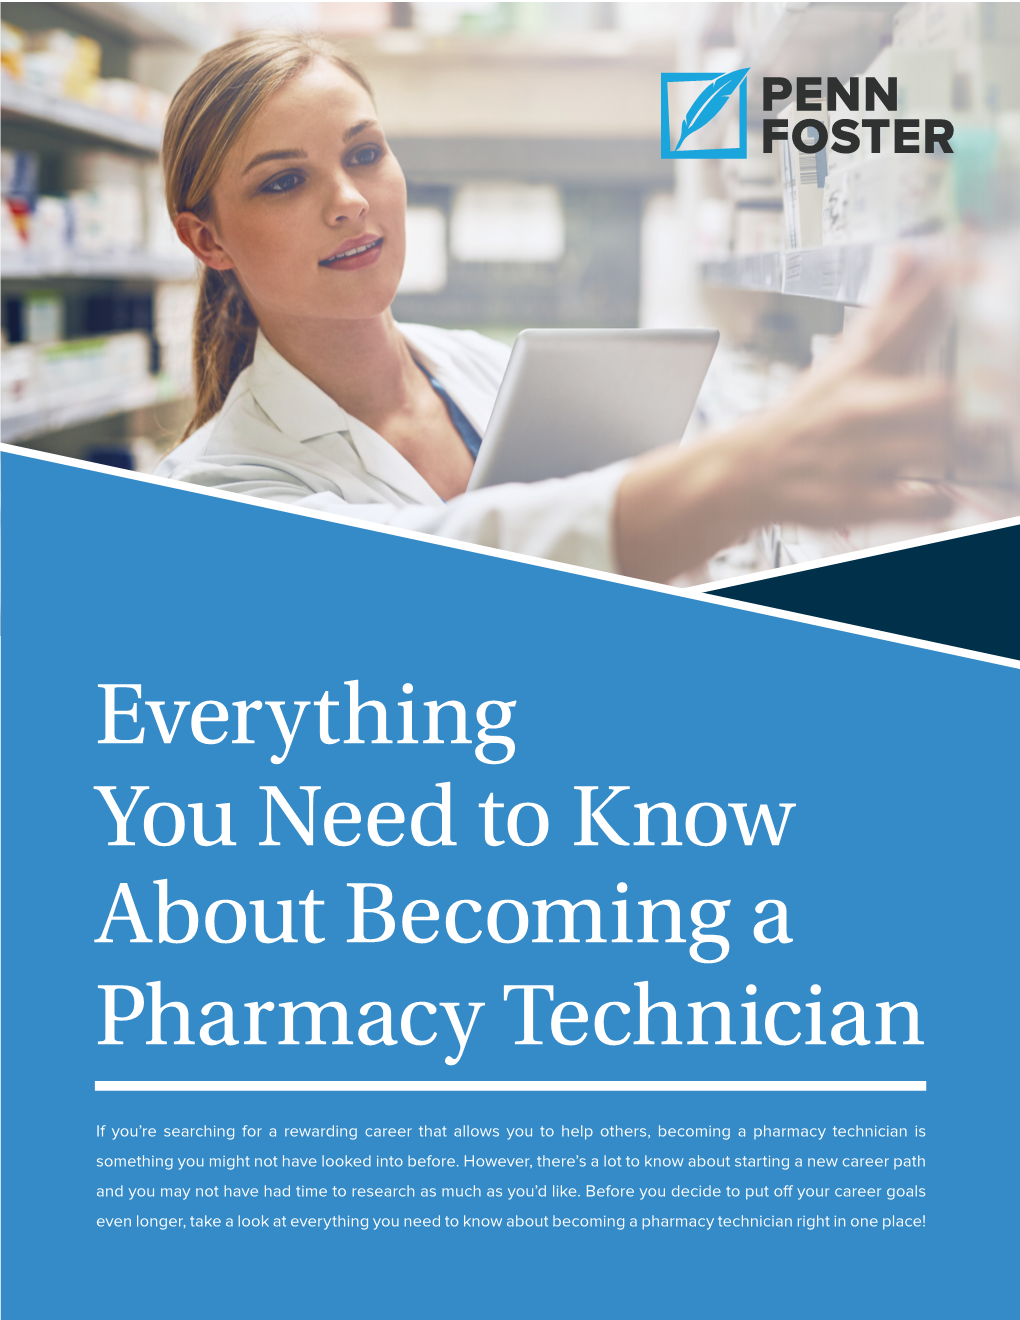 Everything You Need to Know About Becoming a Pharmacy Technician